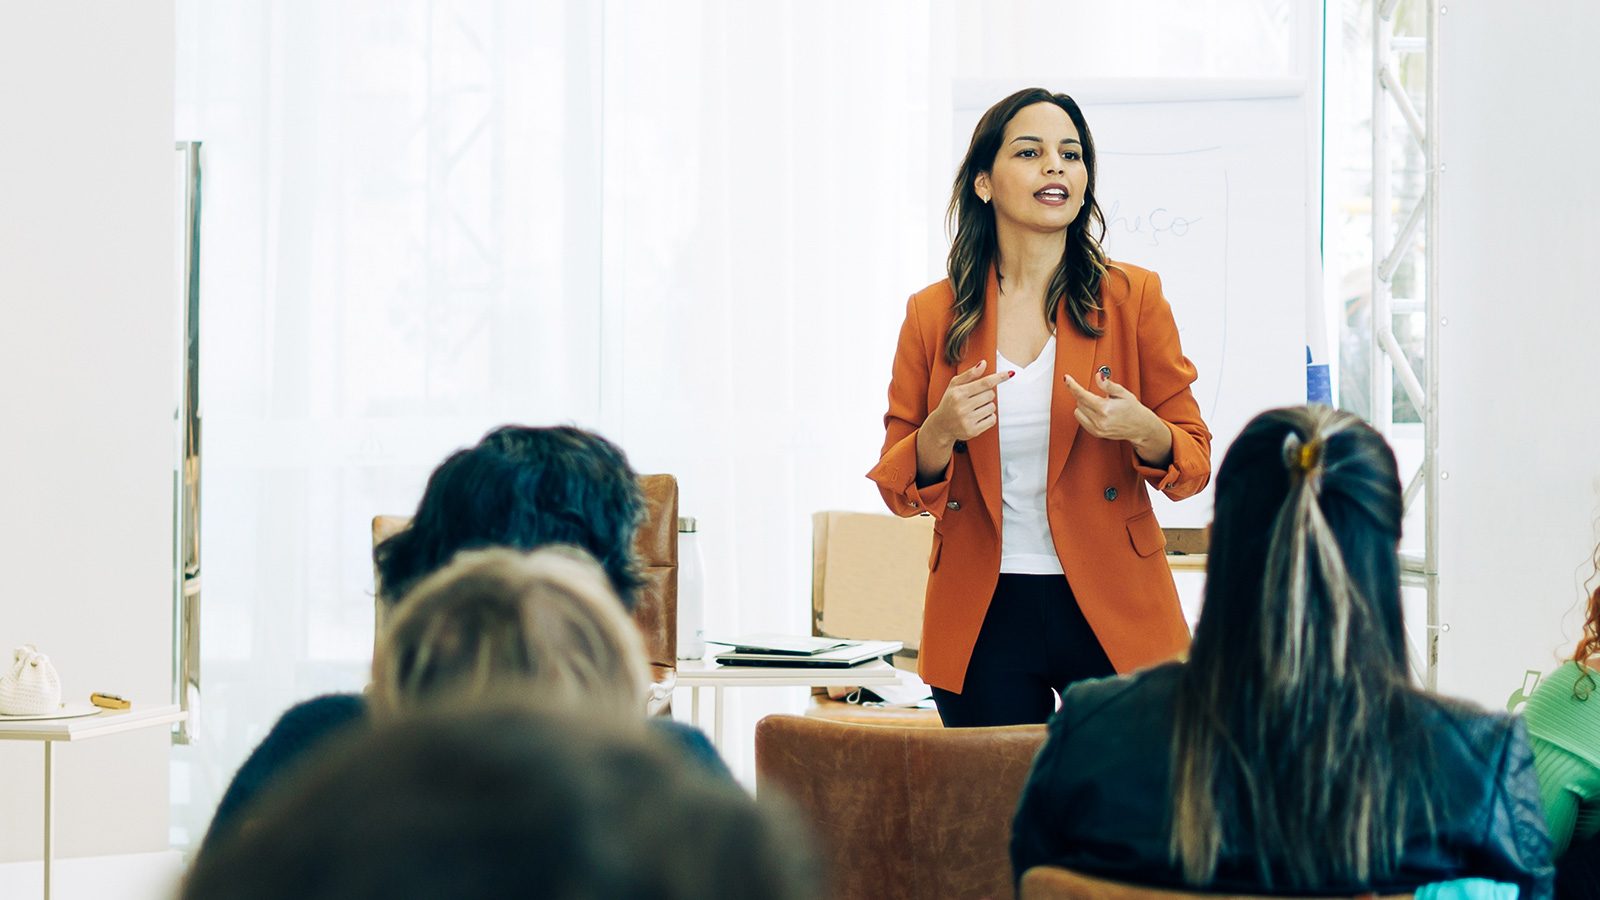 3 Fears About Public Speaking, and How to Move Past Them